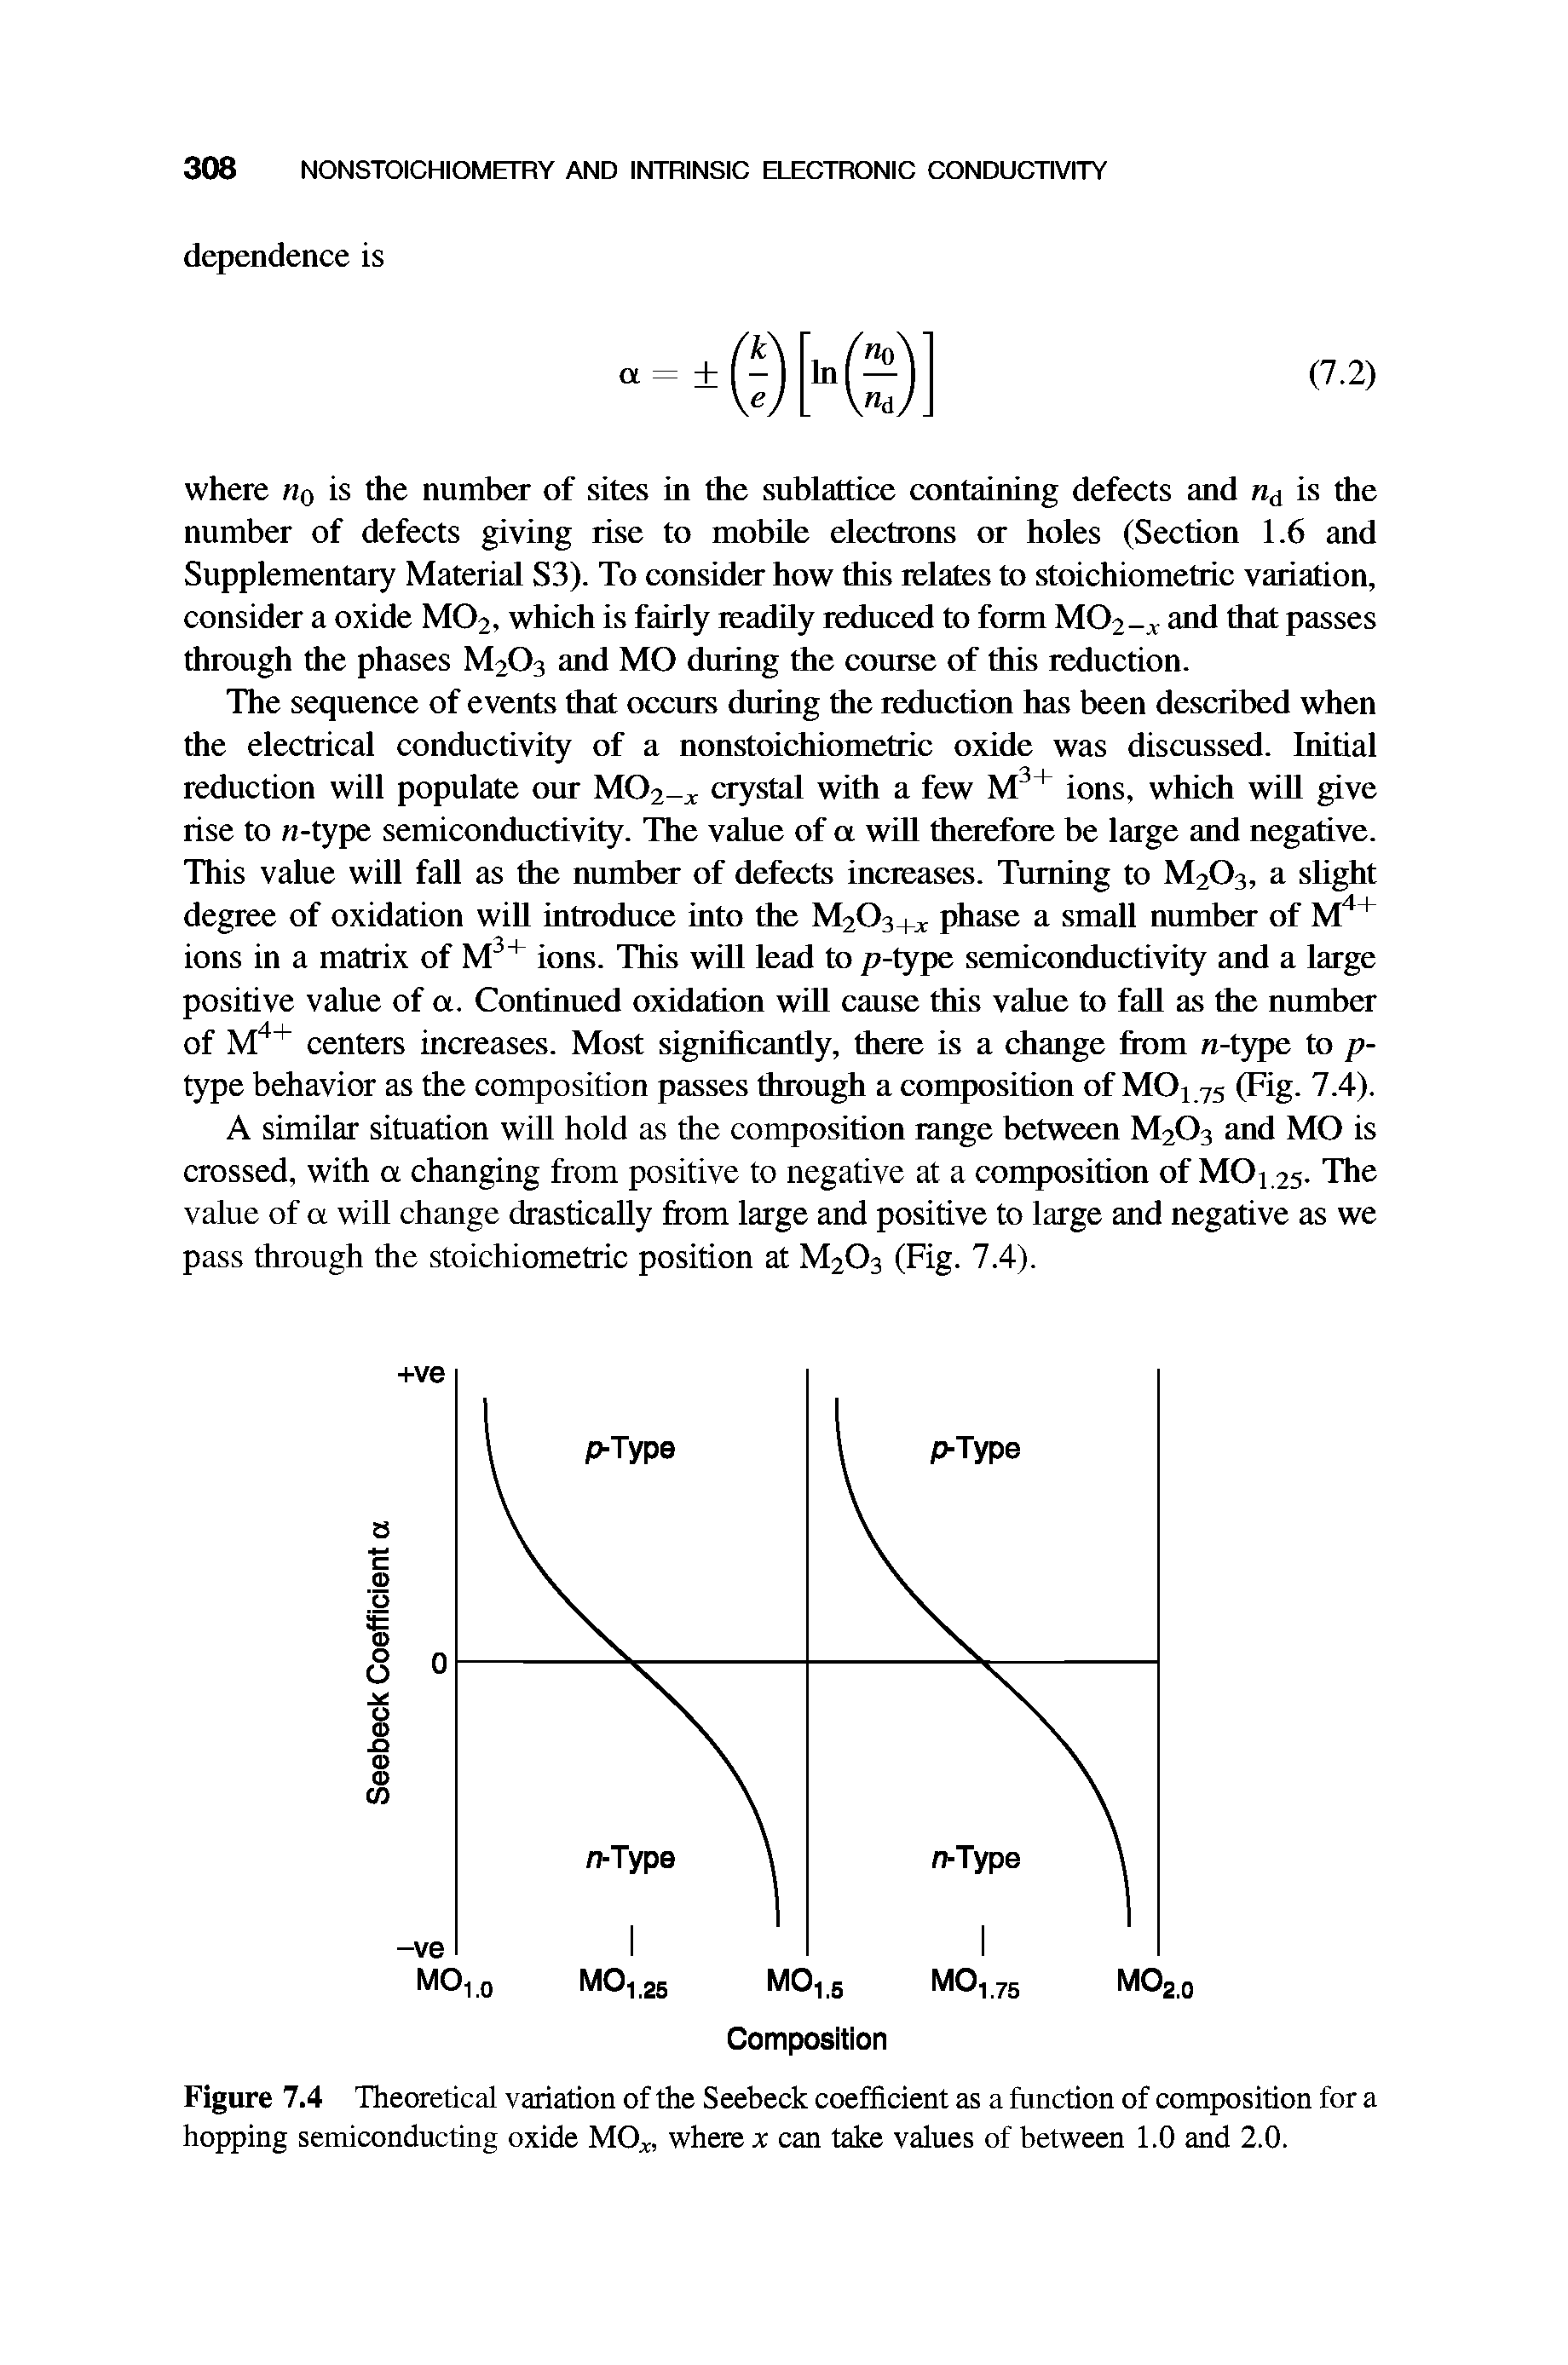 Figure 7.4 Theoretical variation of the Seebeck coefficient as a function of composition for a hopping semiconducting oxide MOx, where x can take values of between 1.0 and 2.0.